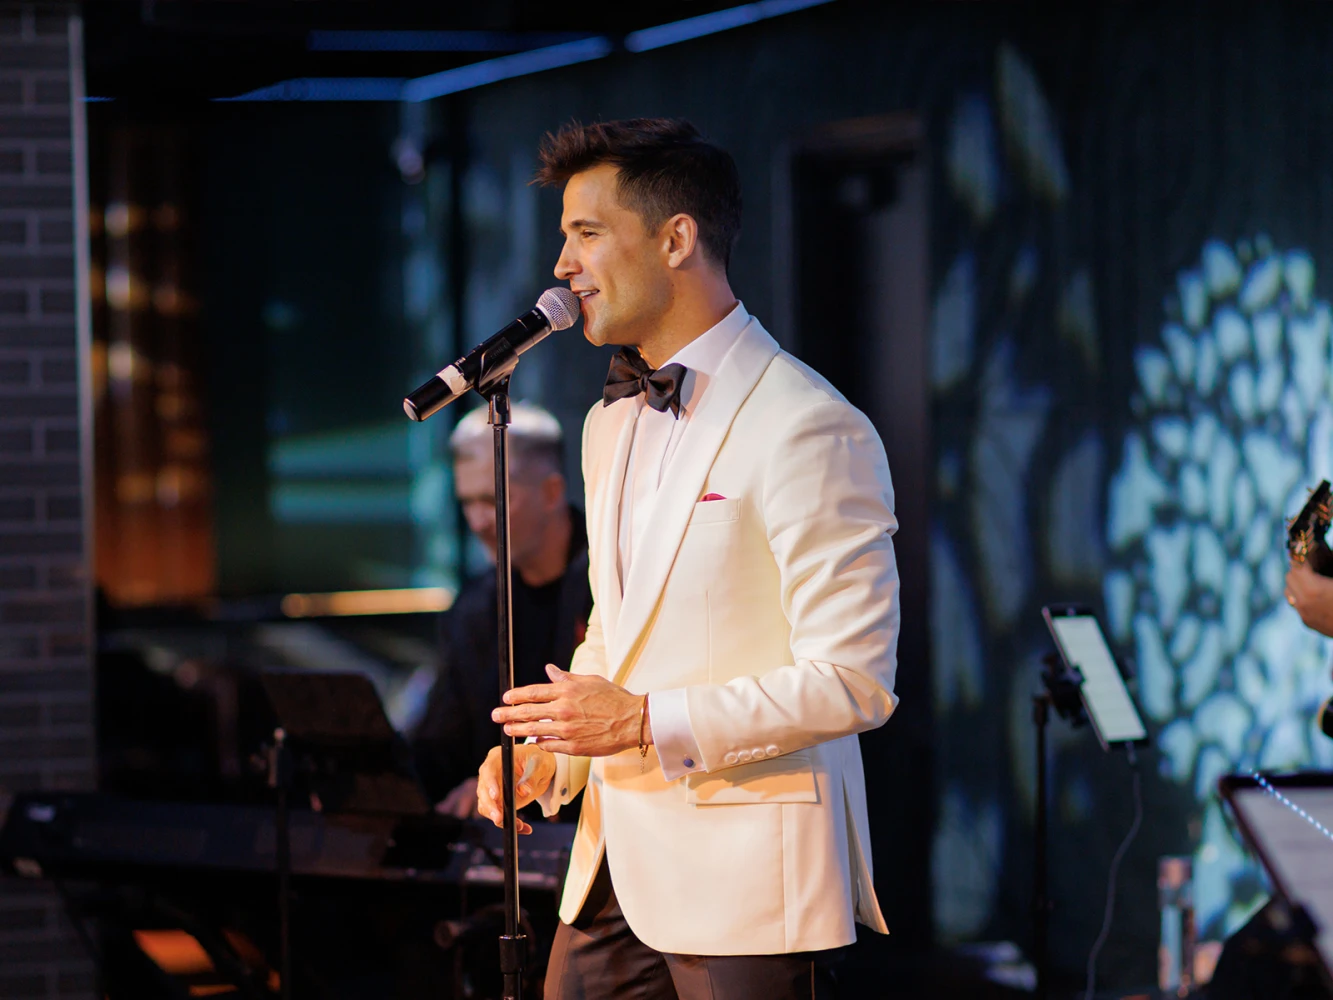 Dez Duron at the Midnight Theatre: What to expect - 2